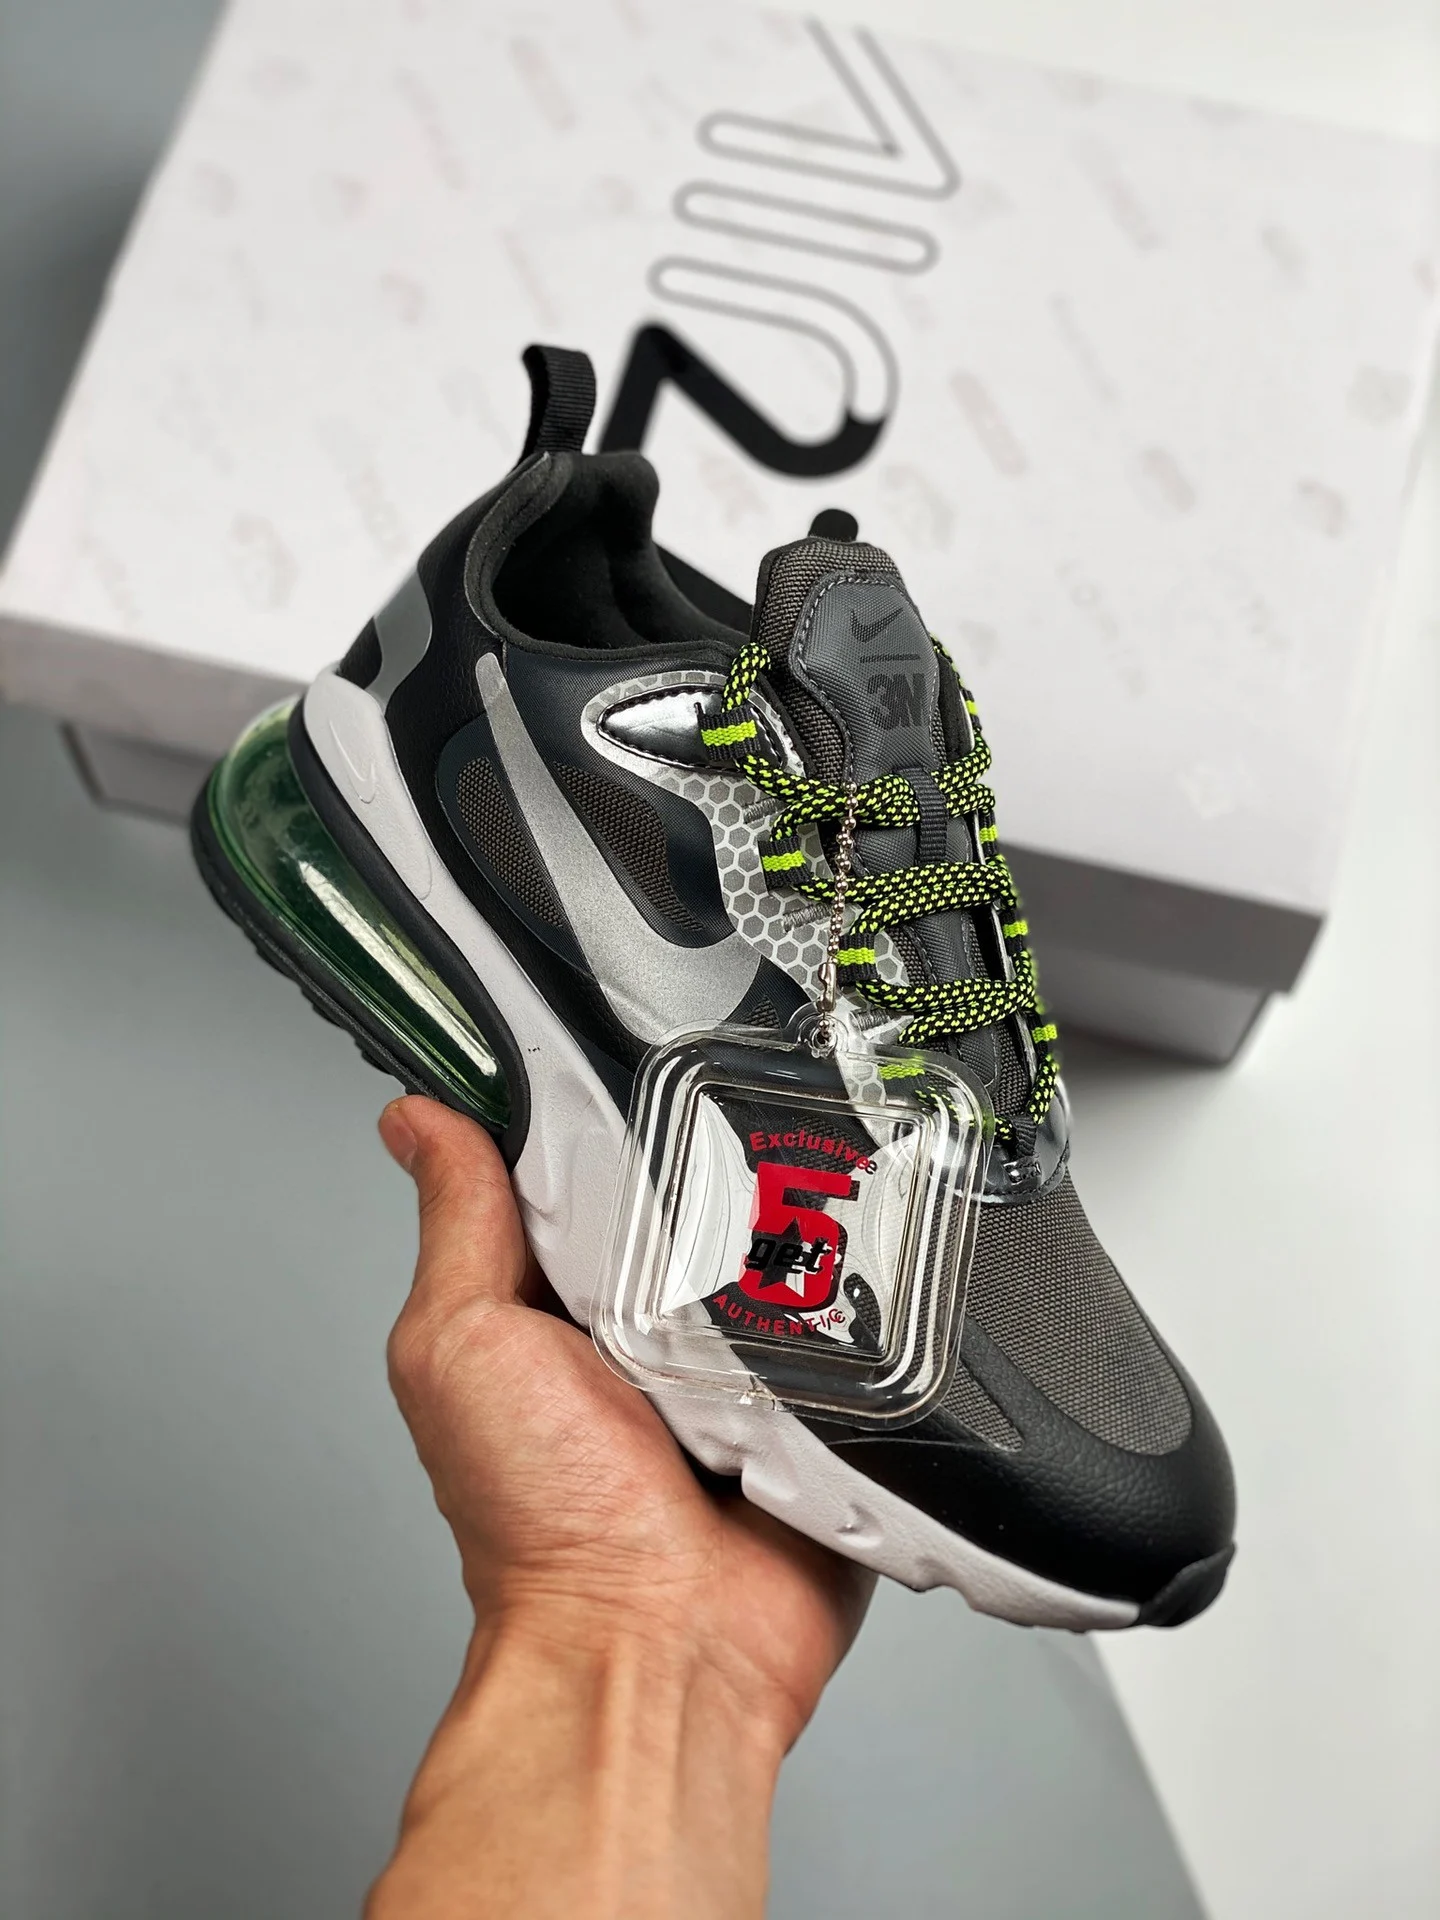 3M x Nike Air Max 270 React Black Reflective Silver CT1647-001 For Sale